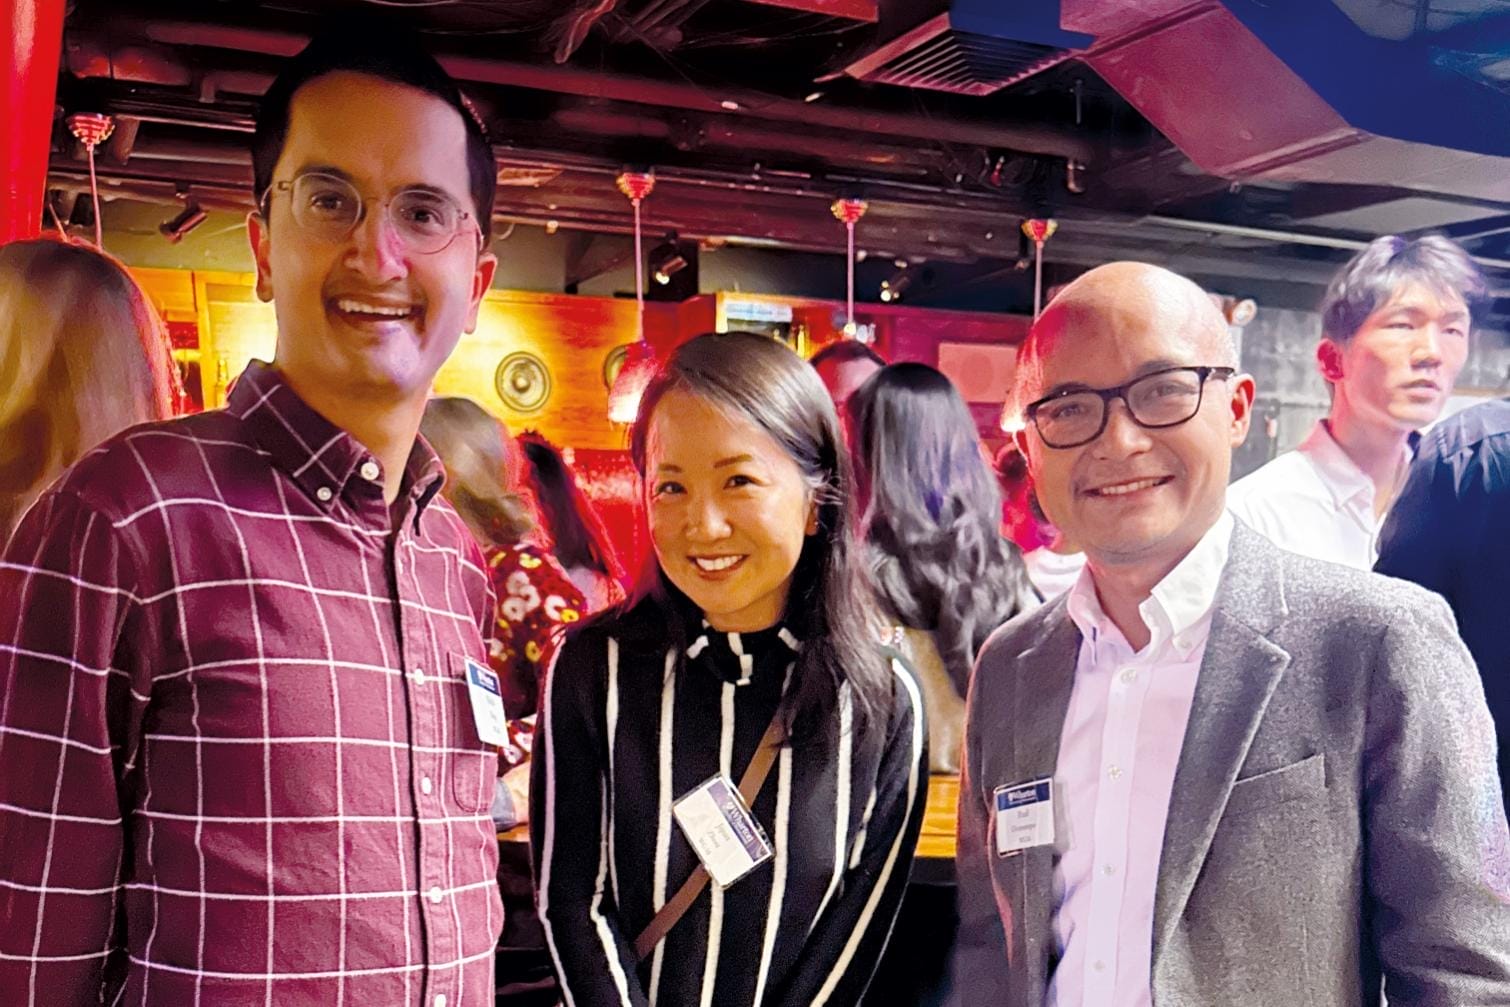 Three people in business casual attire and a casual event space smile for the camera.